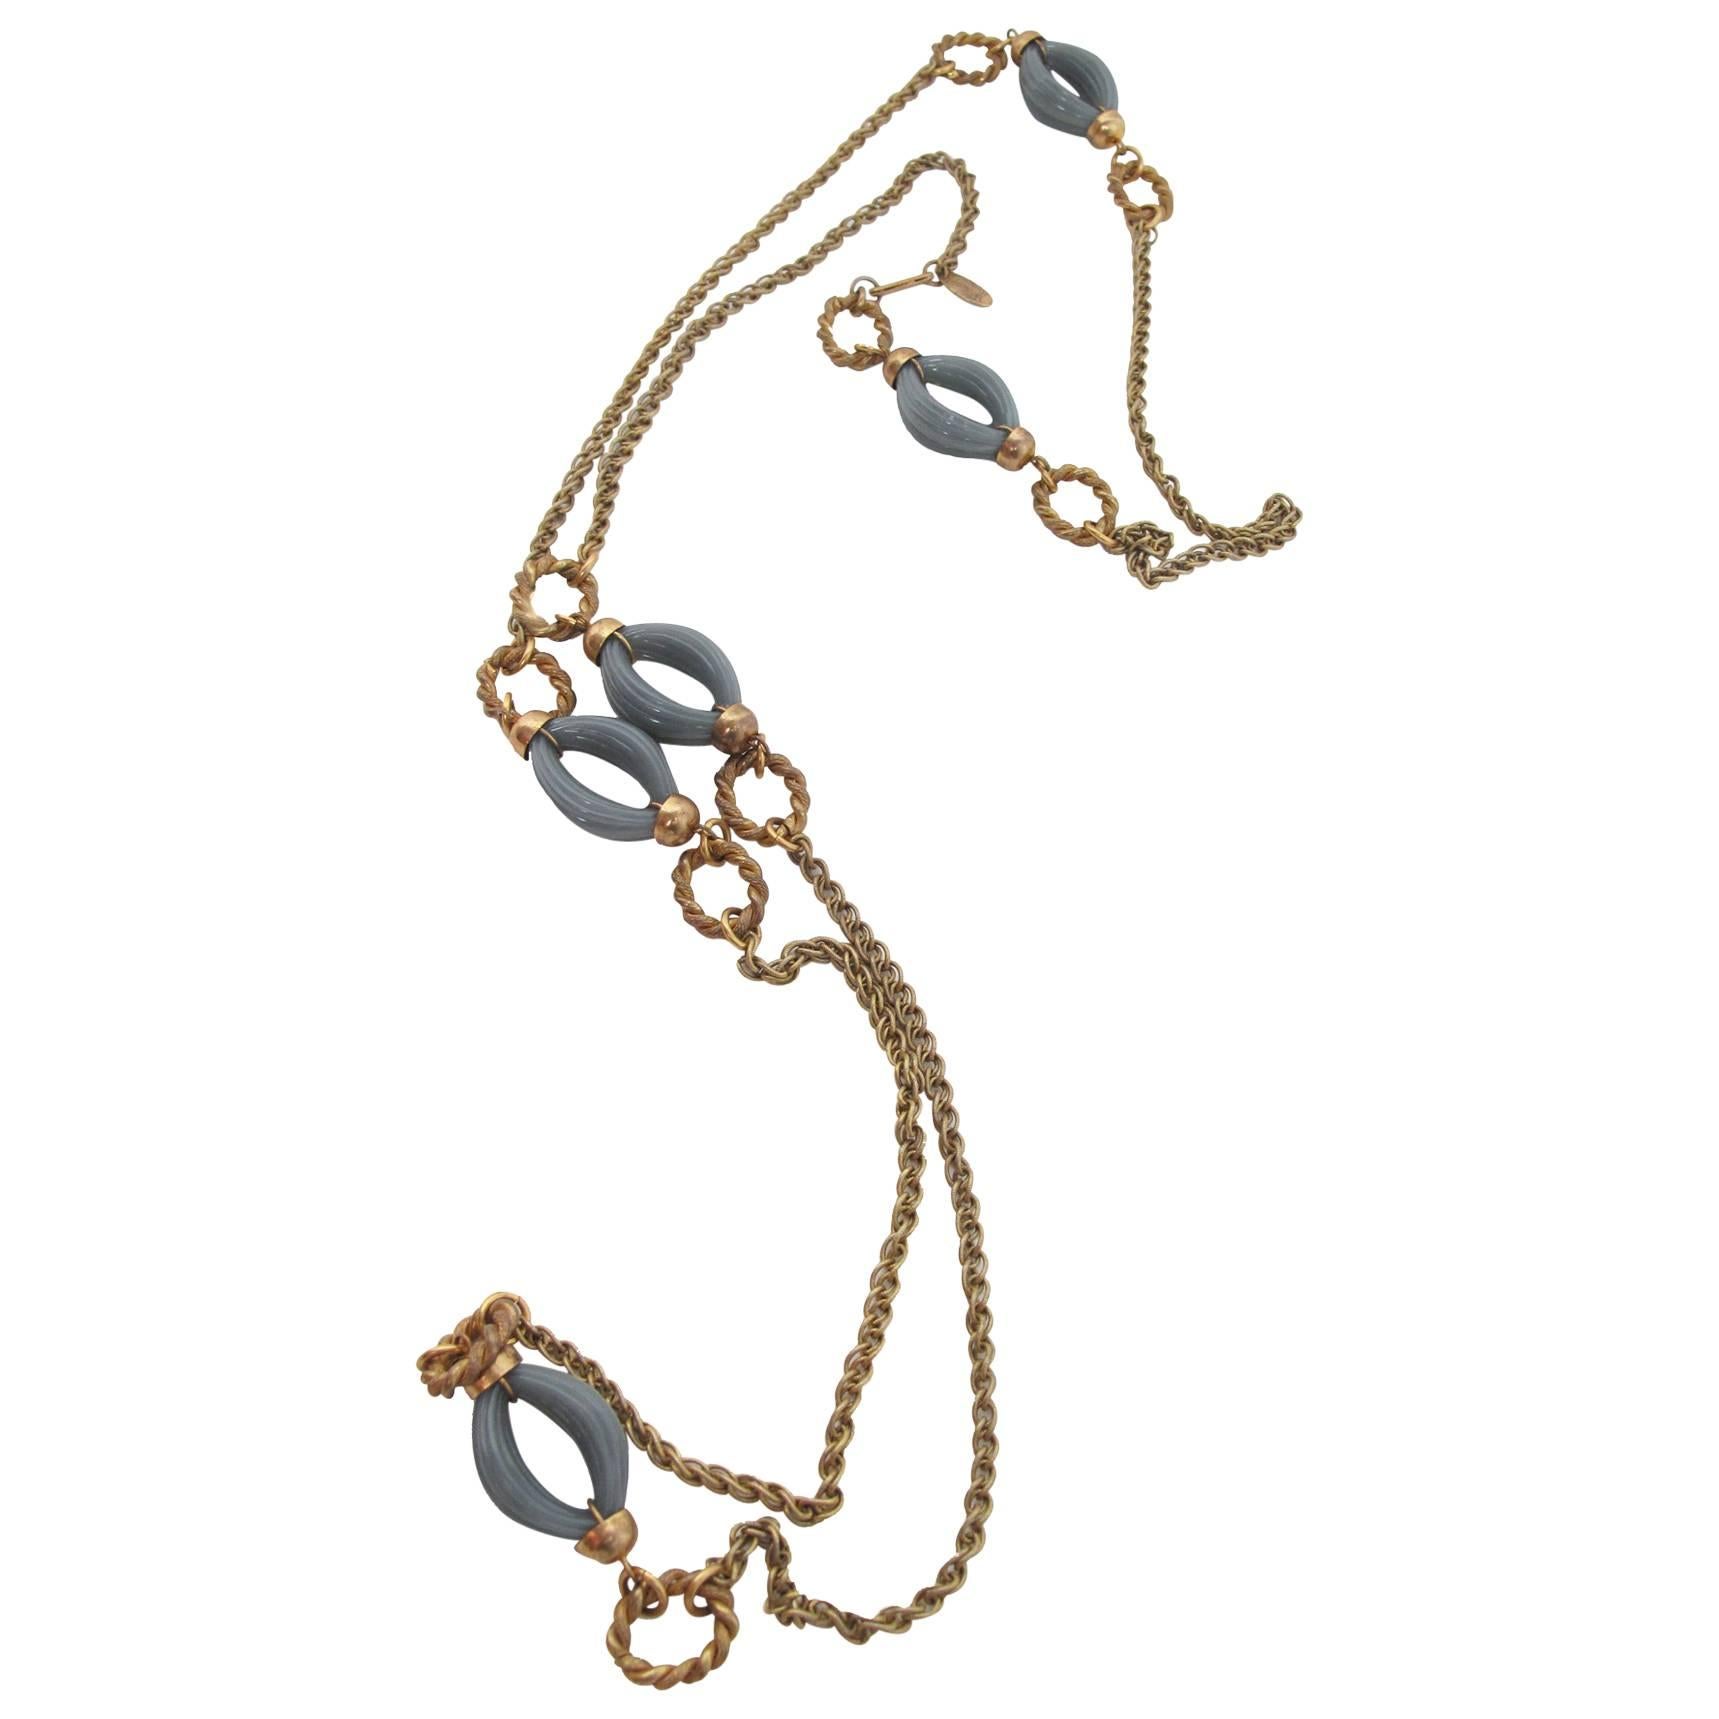 Miriam Haskell Goldtone Chain Necklace with Grey Ovals